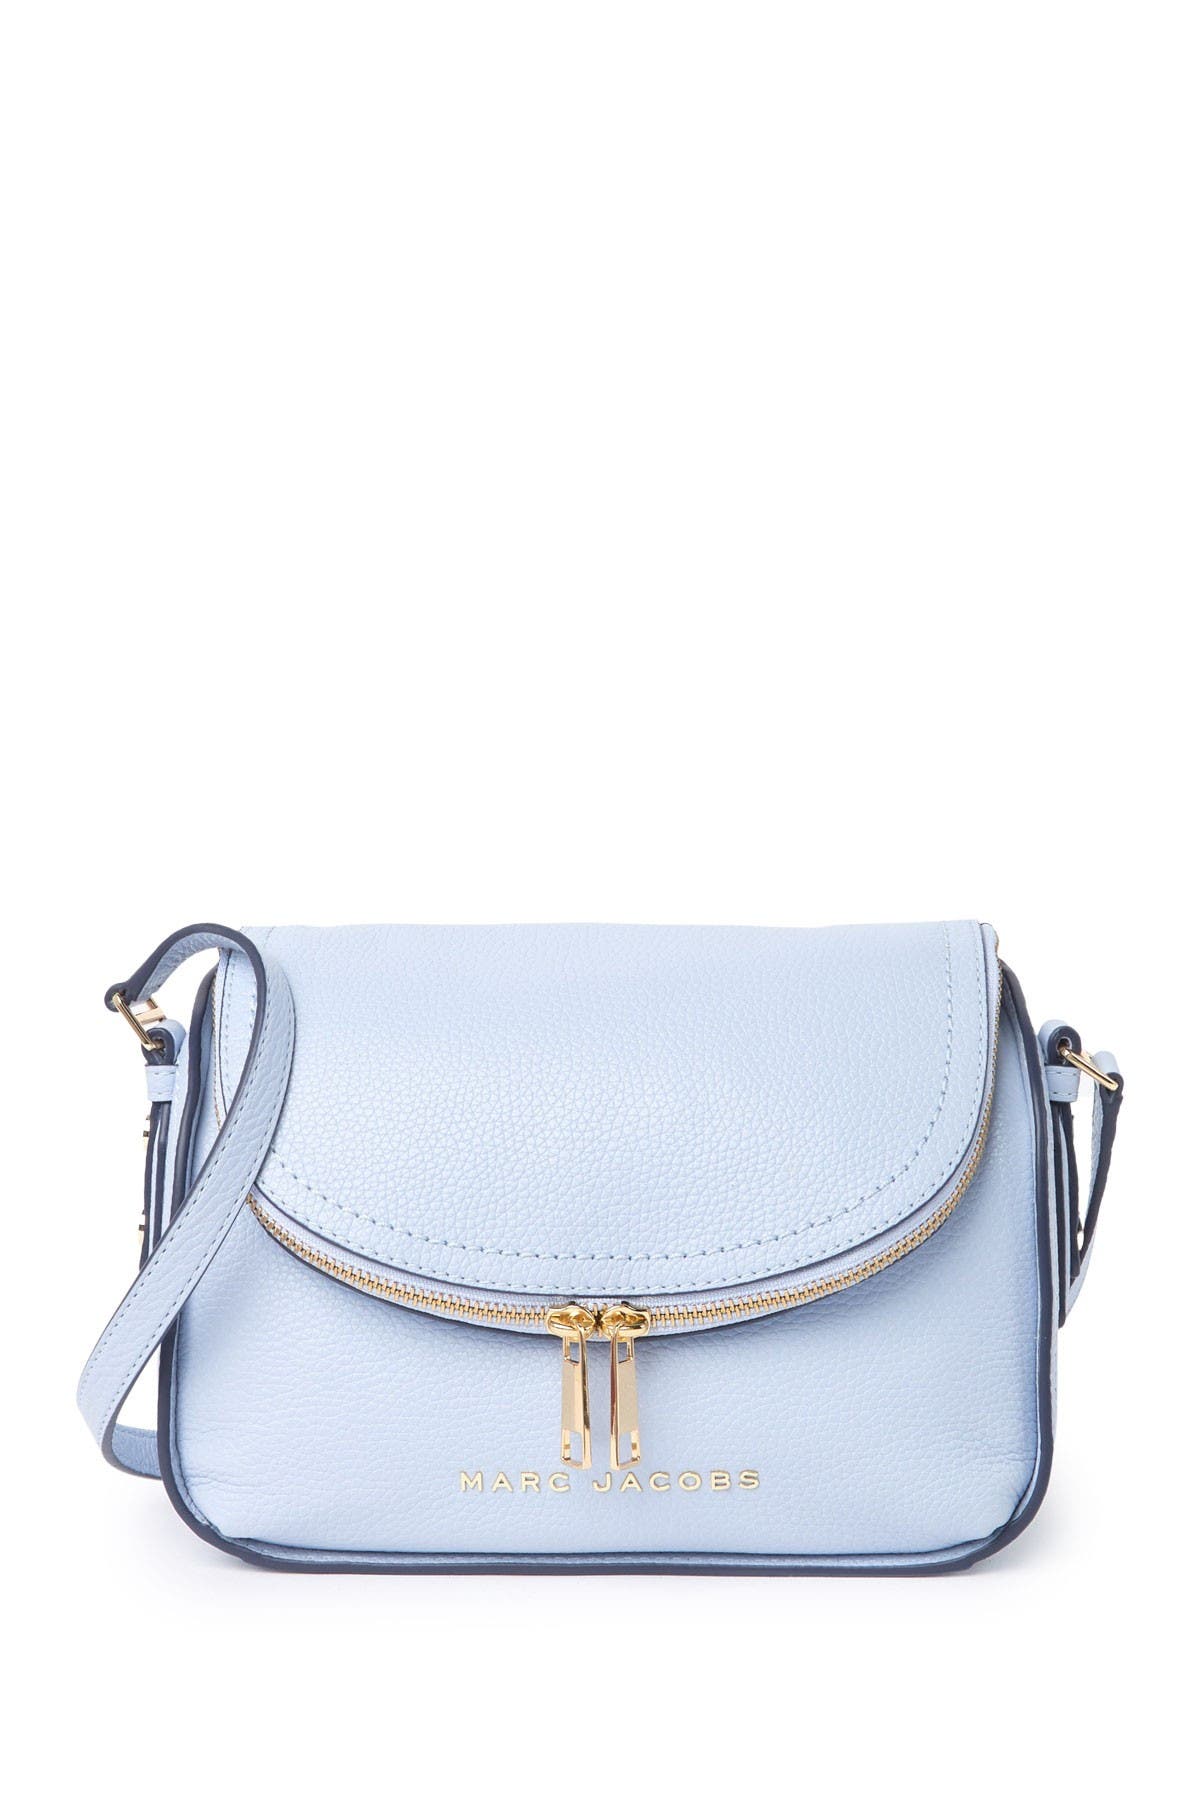 Marc Jacobs The Groove Leather Mini Messenger Bag In Blue Mist